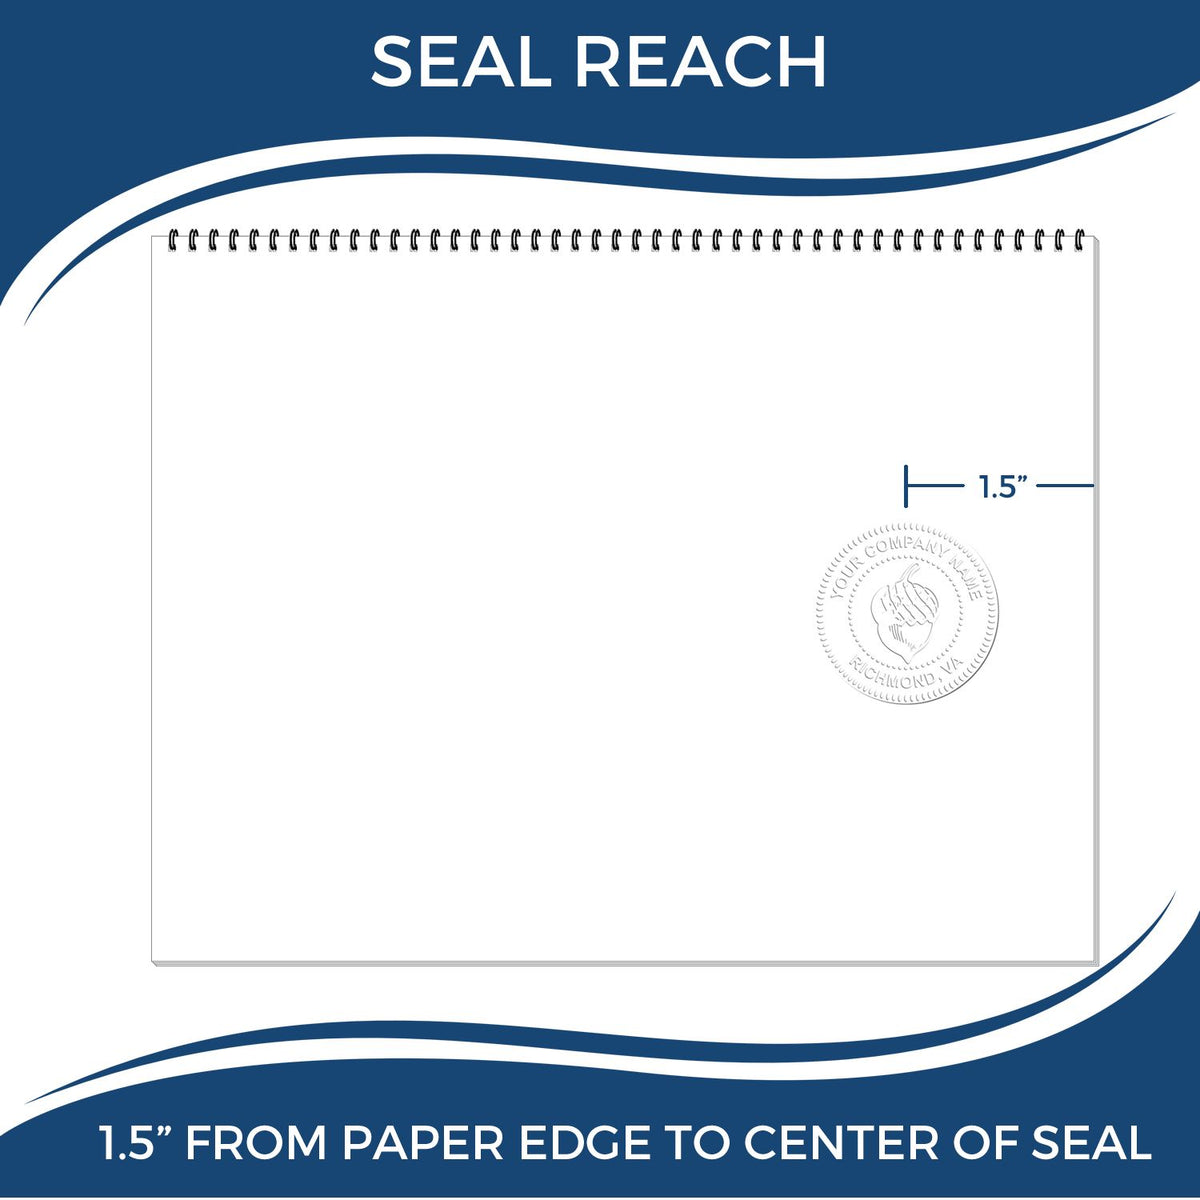 An infographic showing the seal reach which is represented by a ruler and a miniature seal image of the Handheld Maryland Professional Geologist Embosser